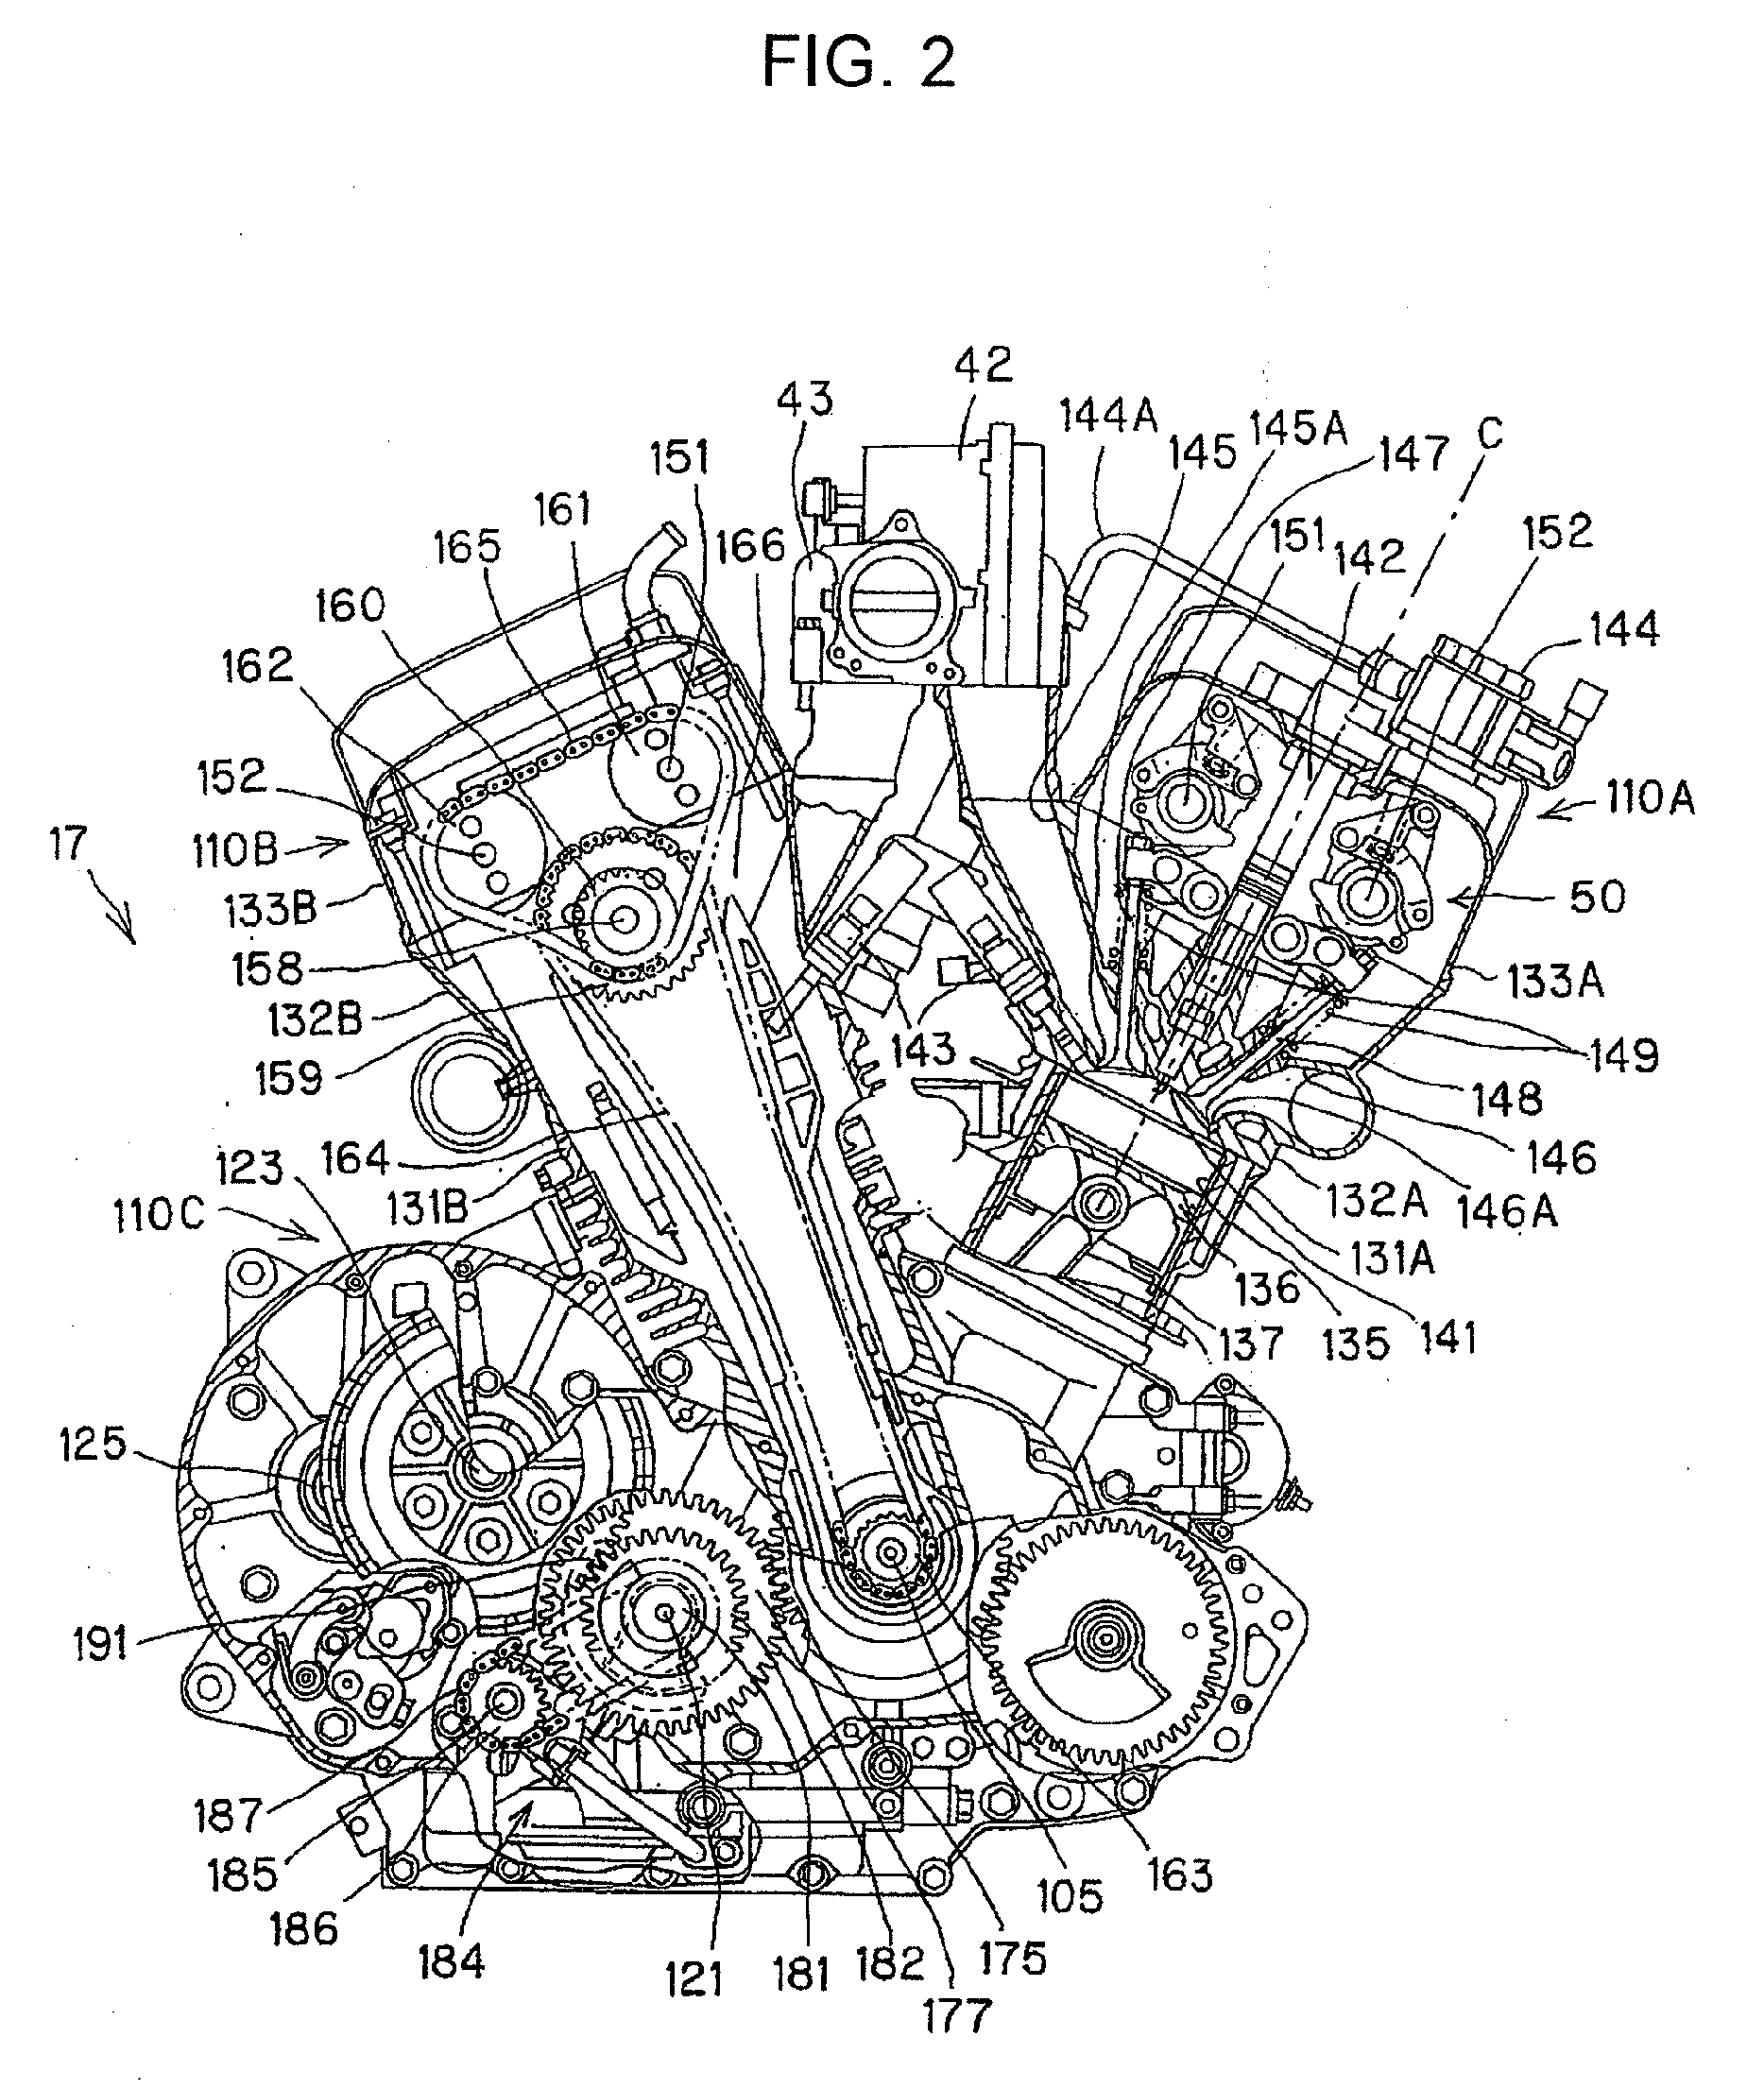 Valve gear for internal combustion engines